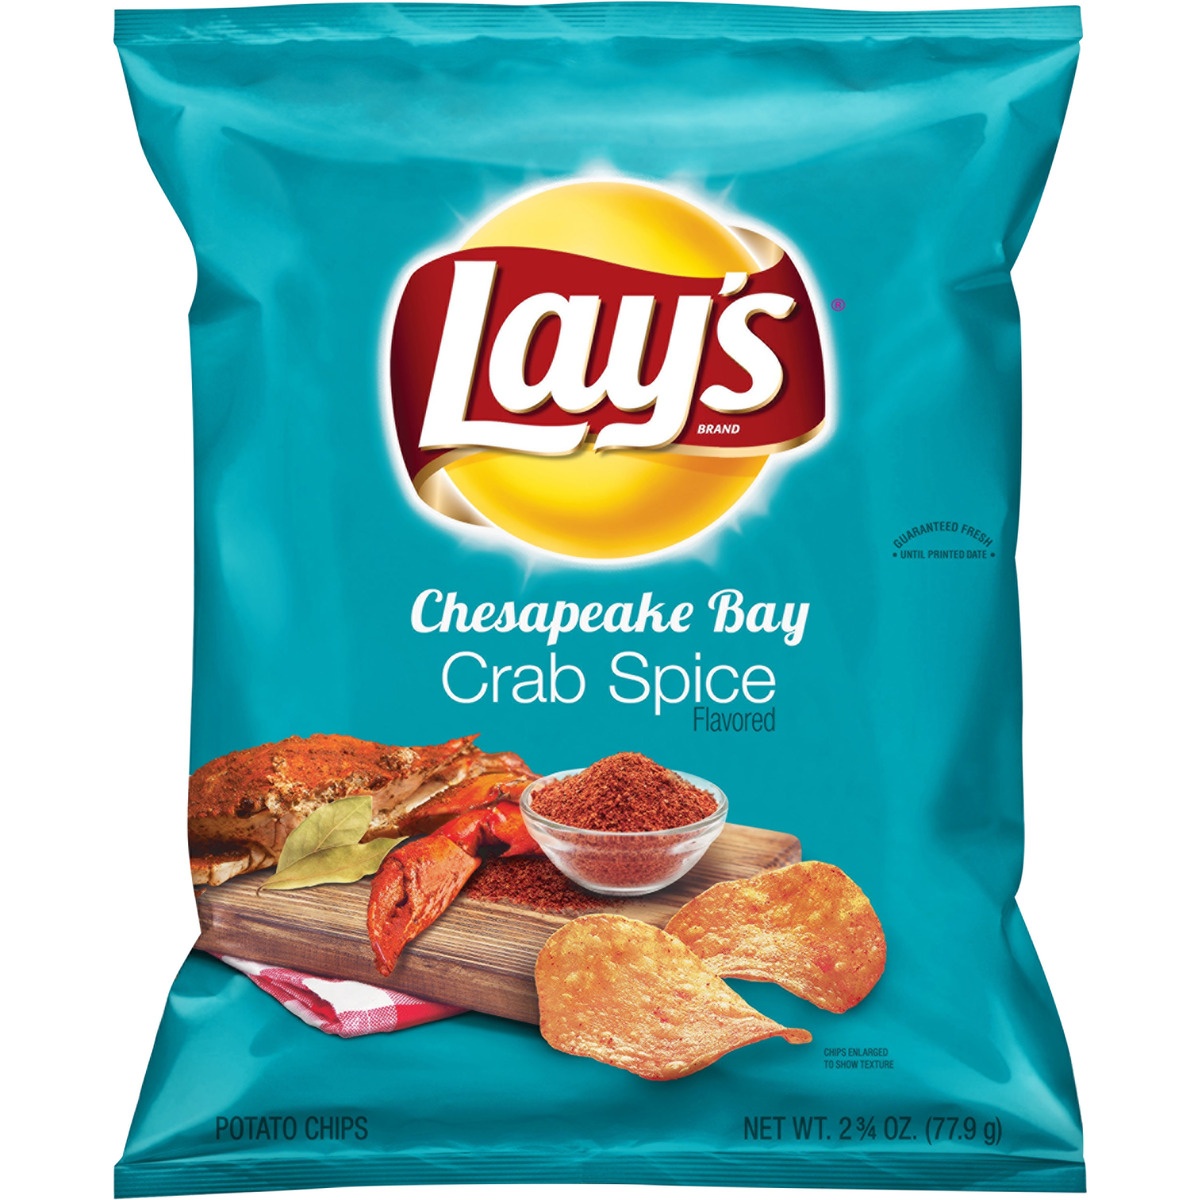 LAY'S® Chesapeake Bay Crab Spice Flavored Potato Chips